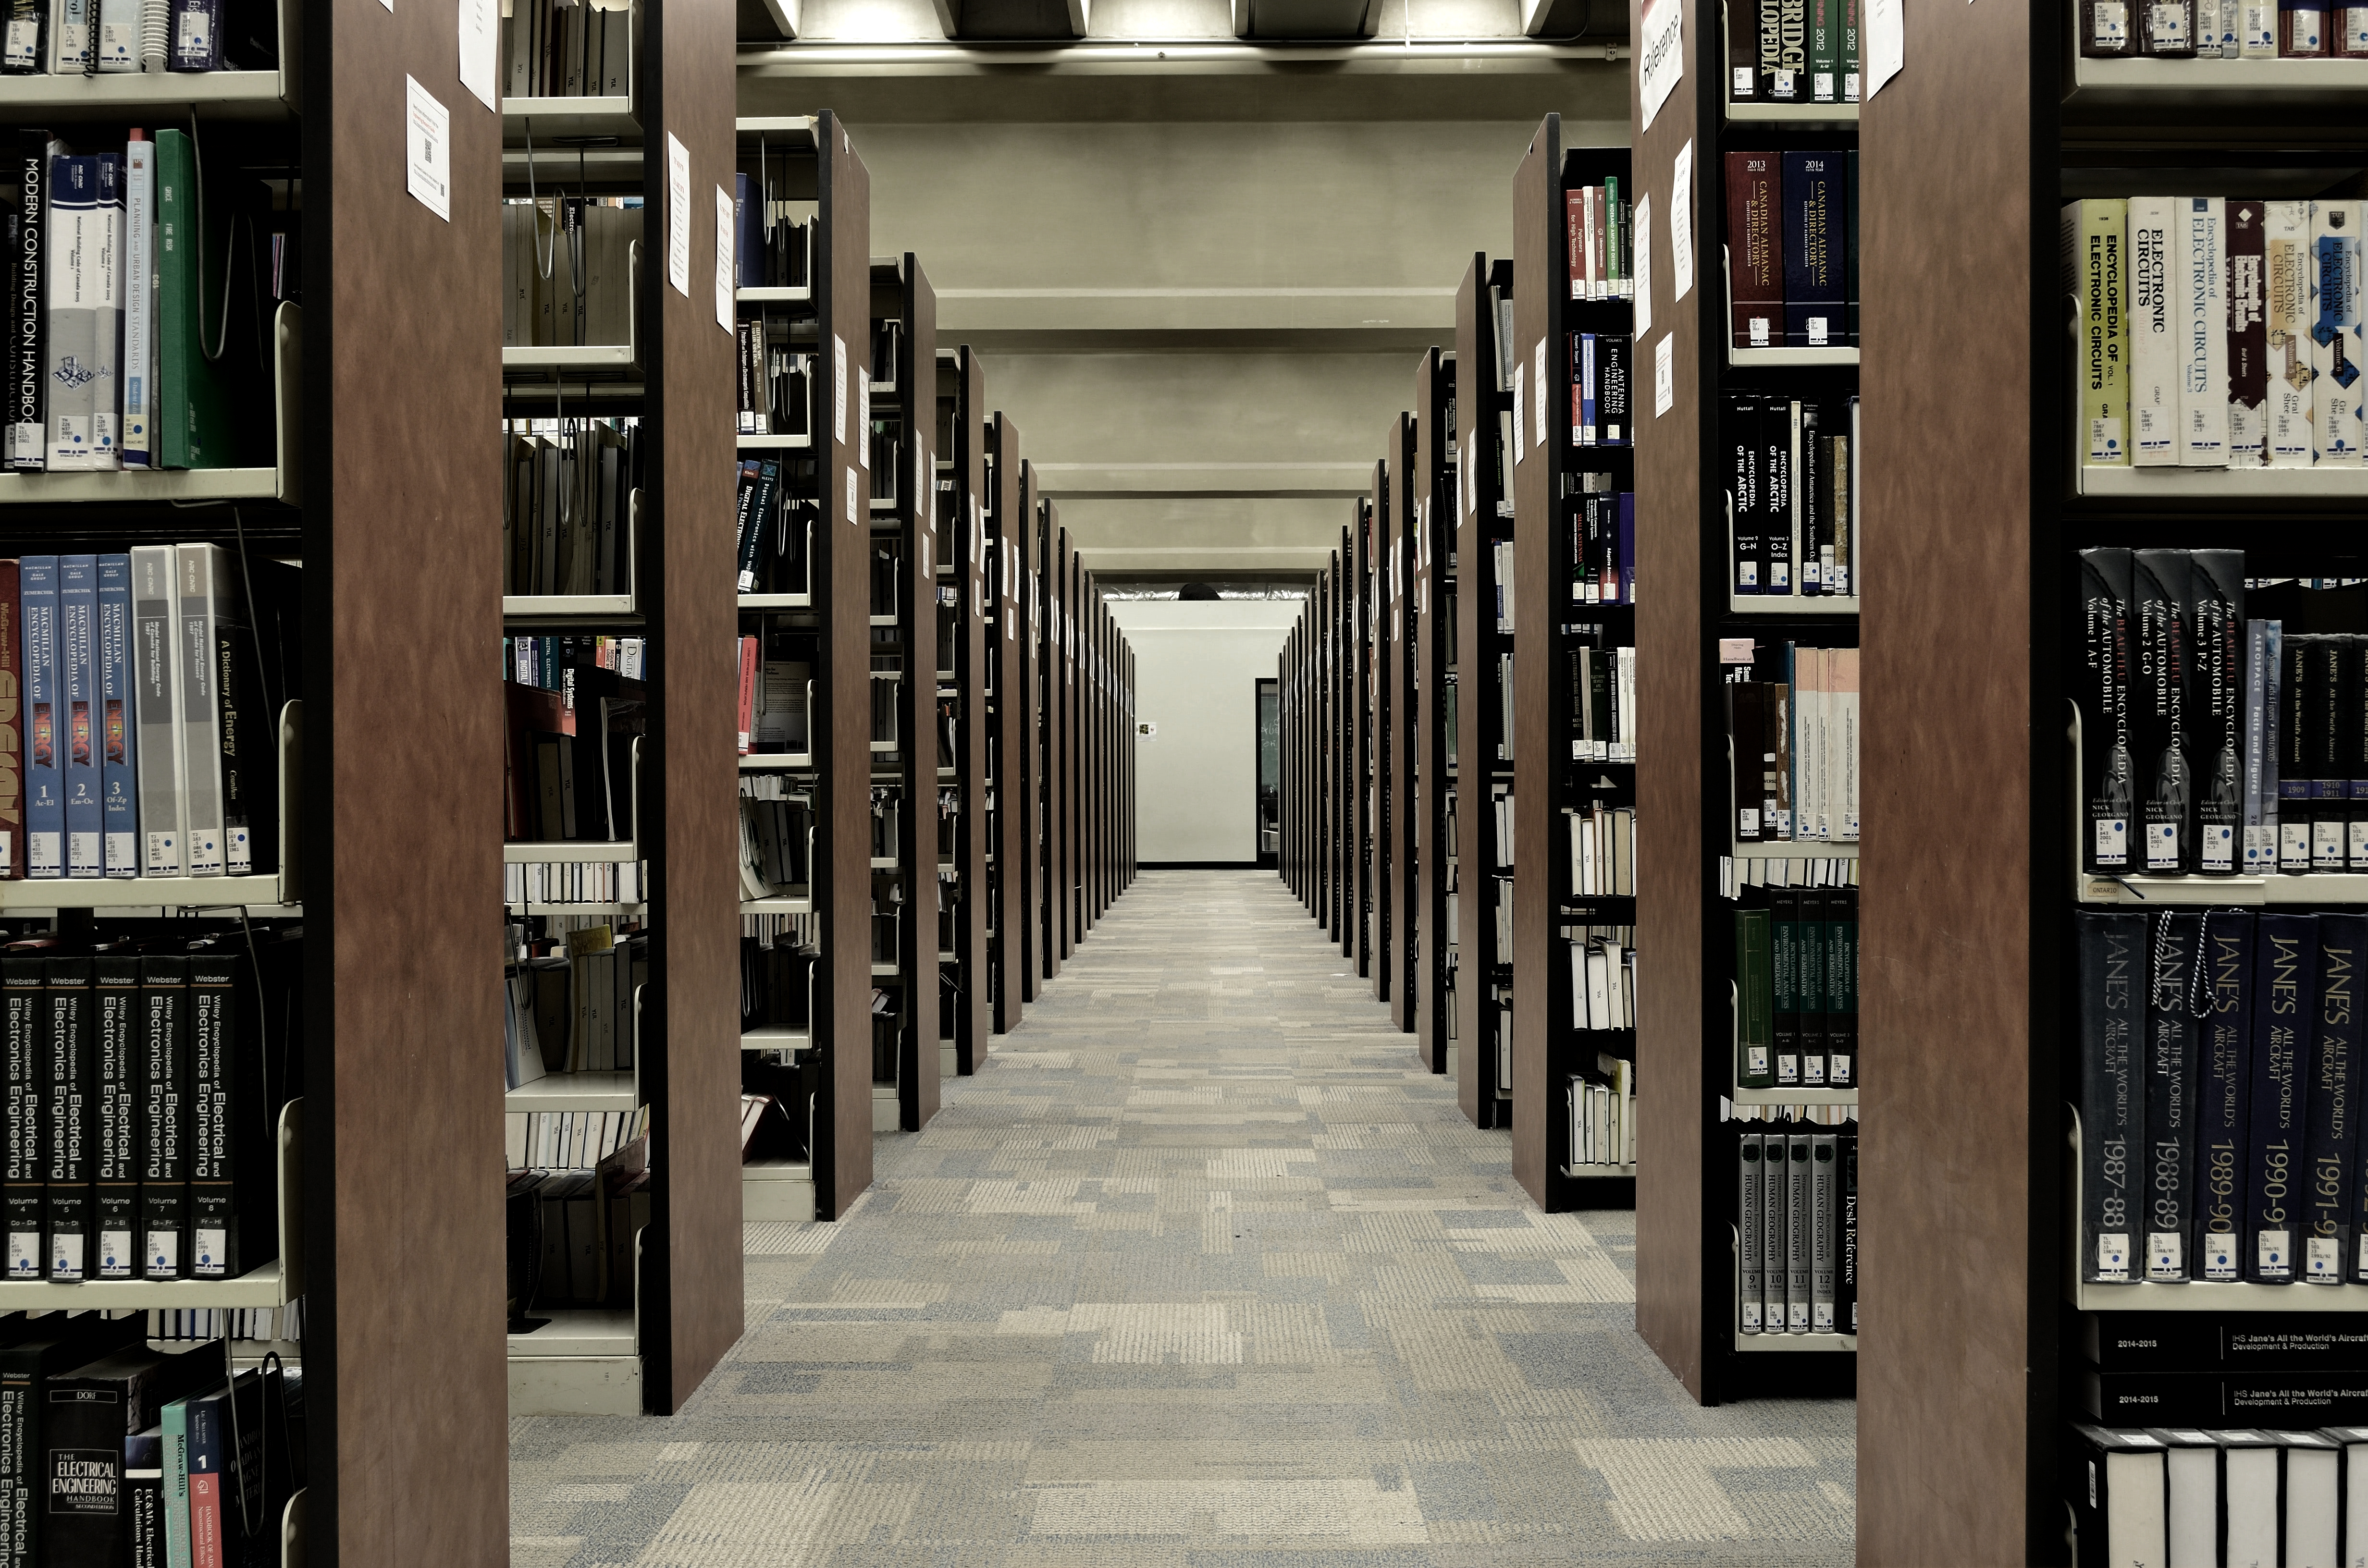 UC Libraries